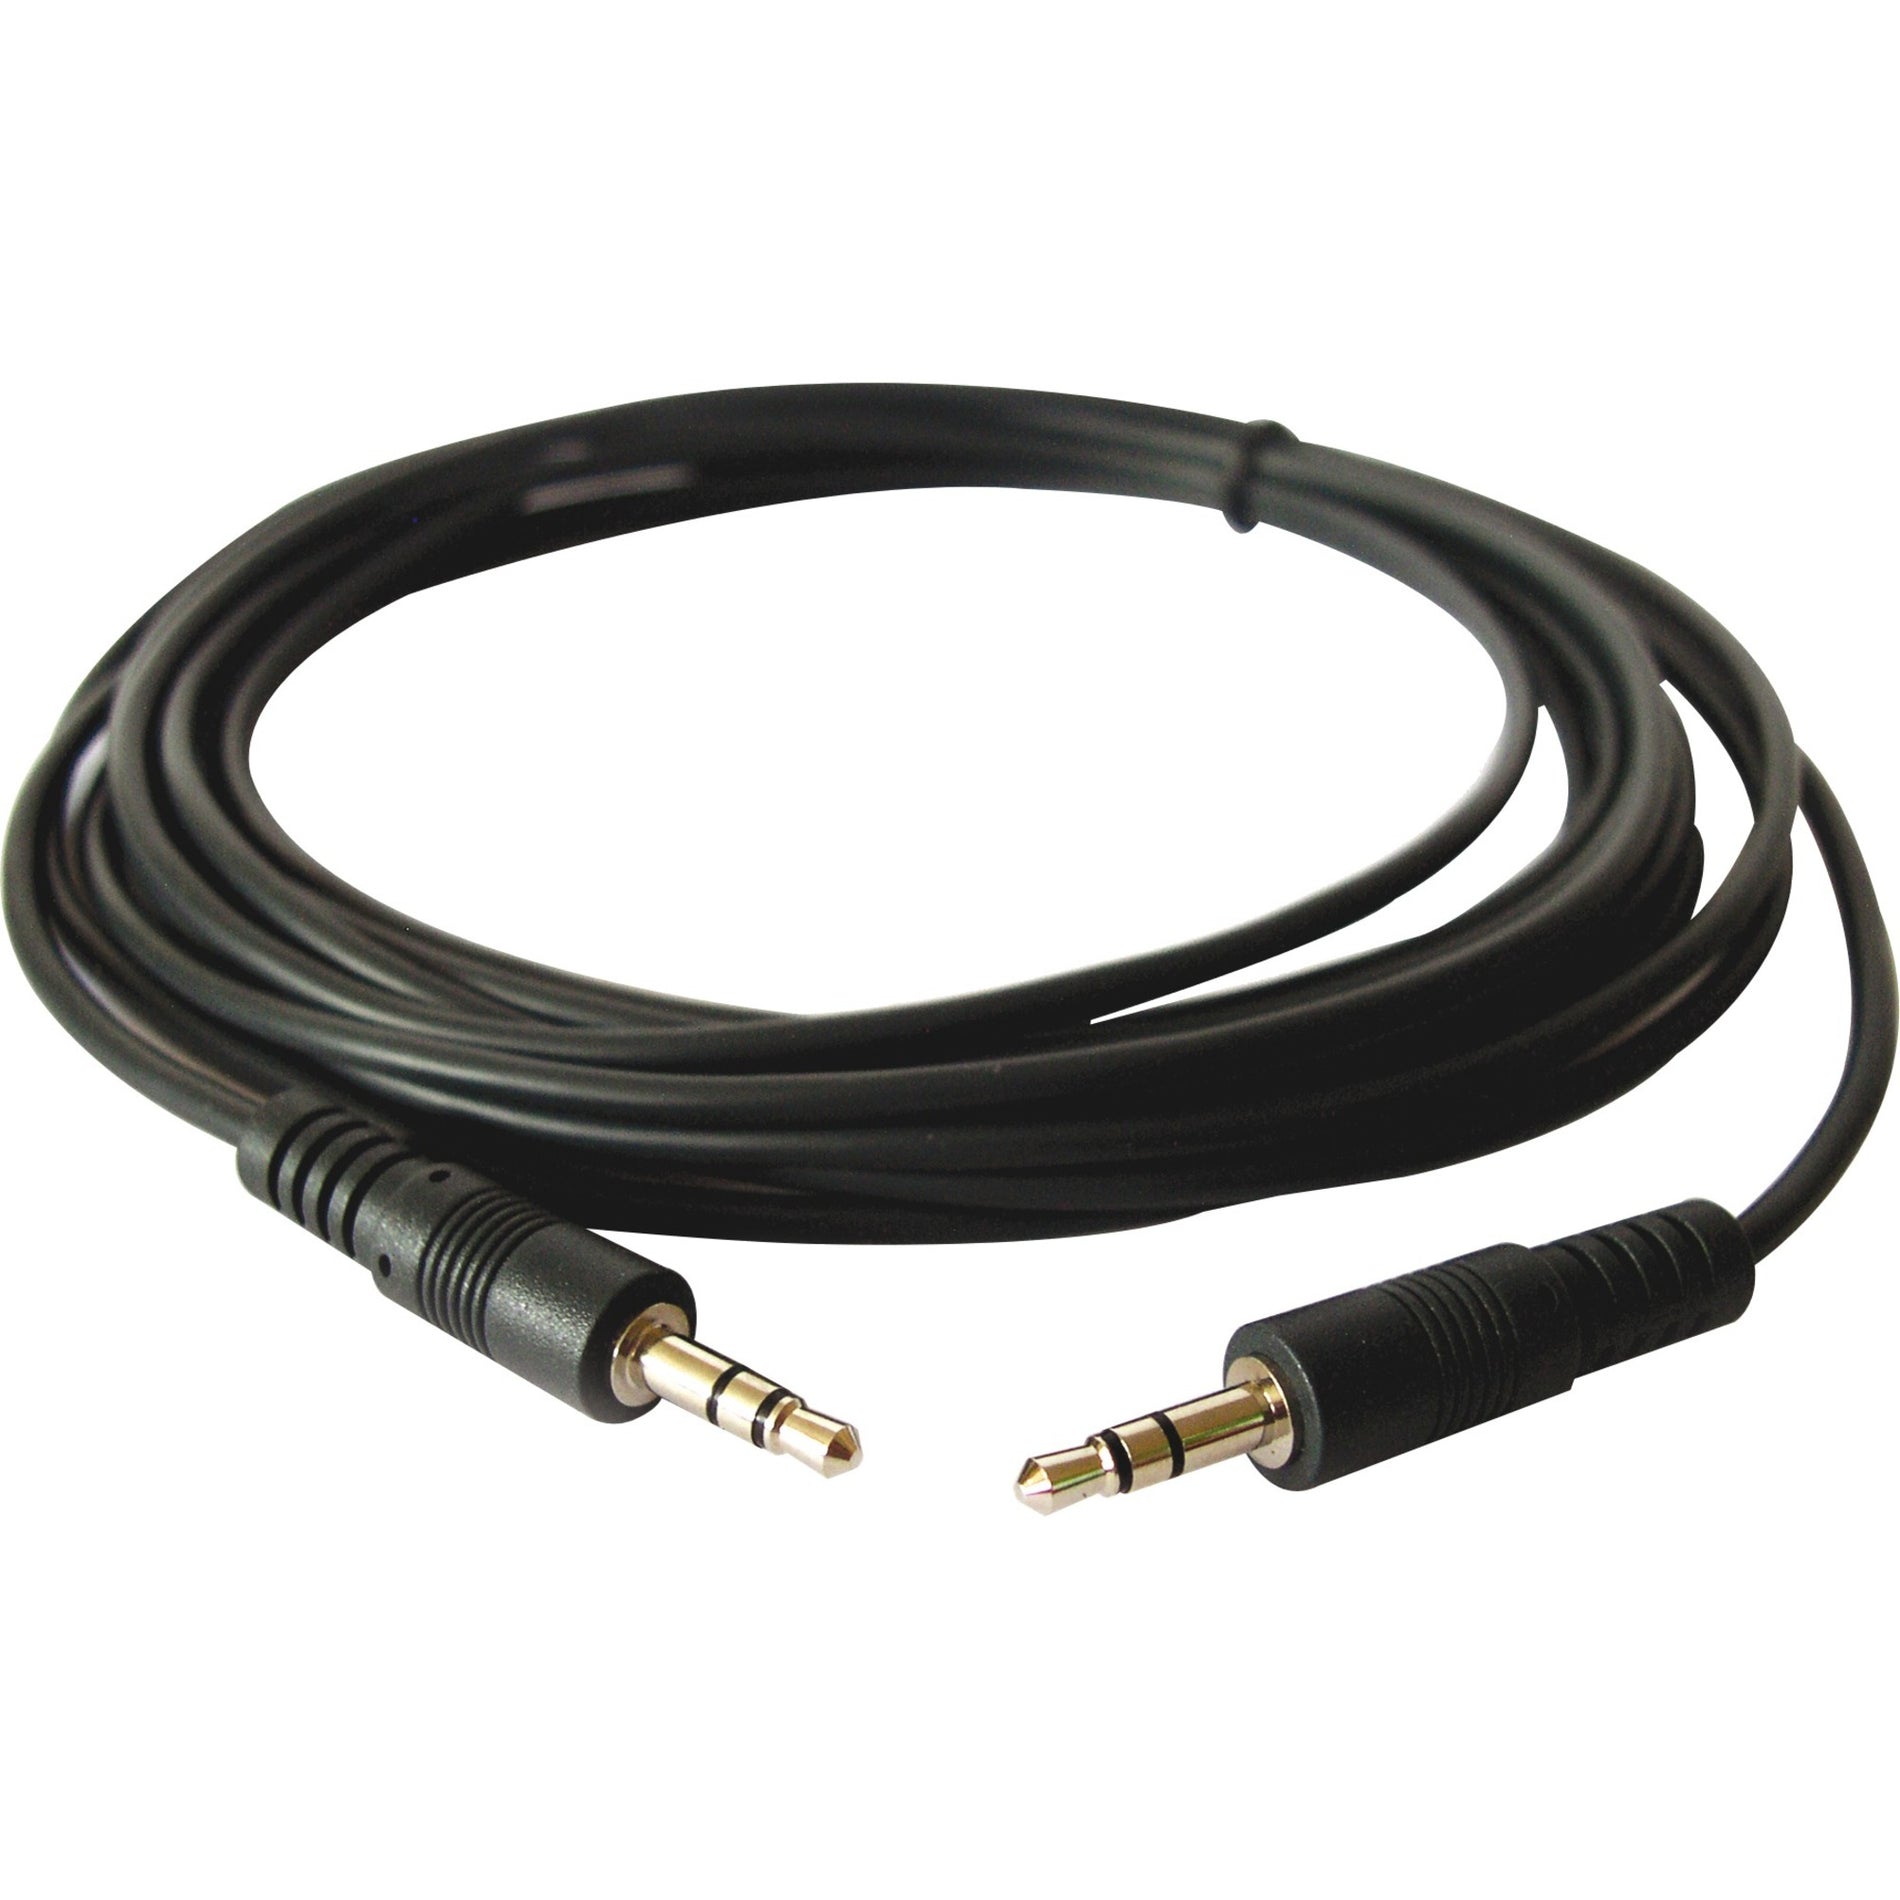 Kramer 3.5mm (M) to 3.5mm (M) Stereo Audio Cable (95-0101006)